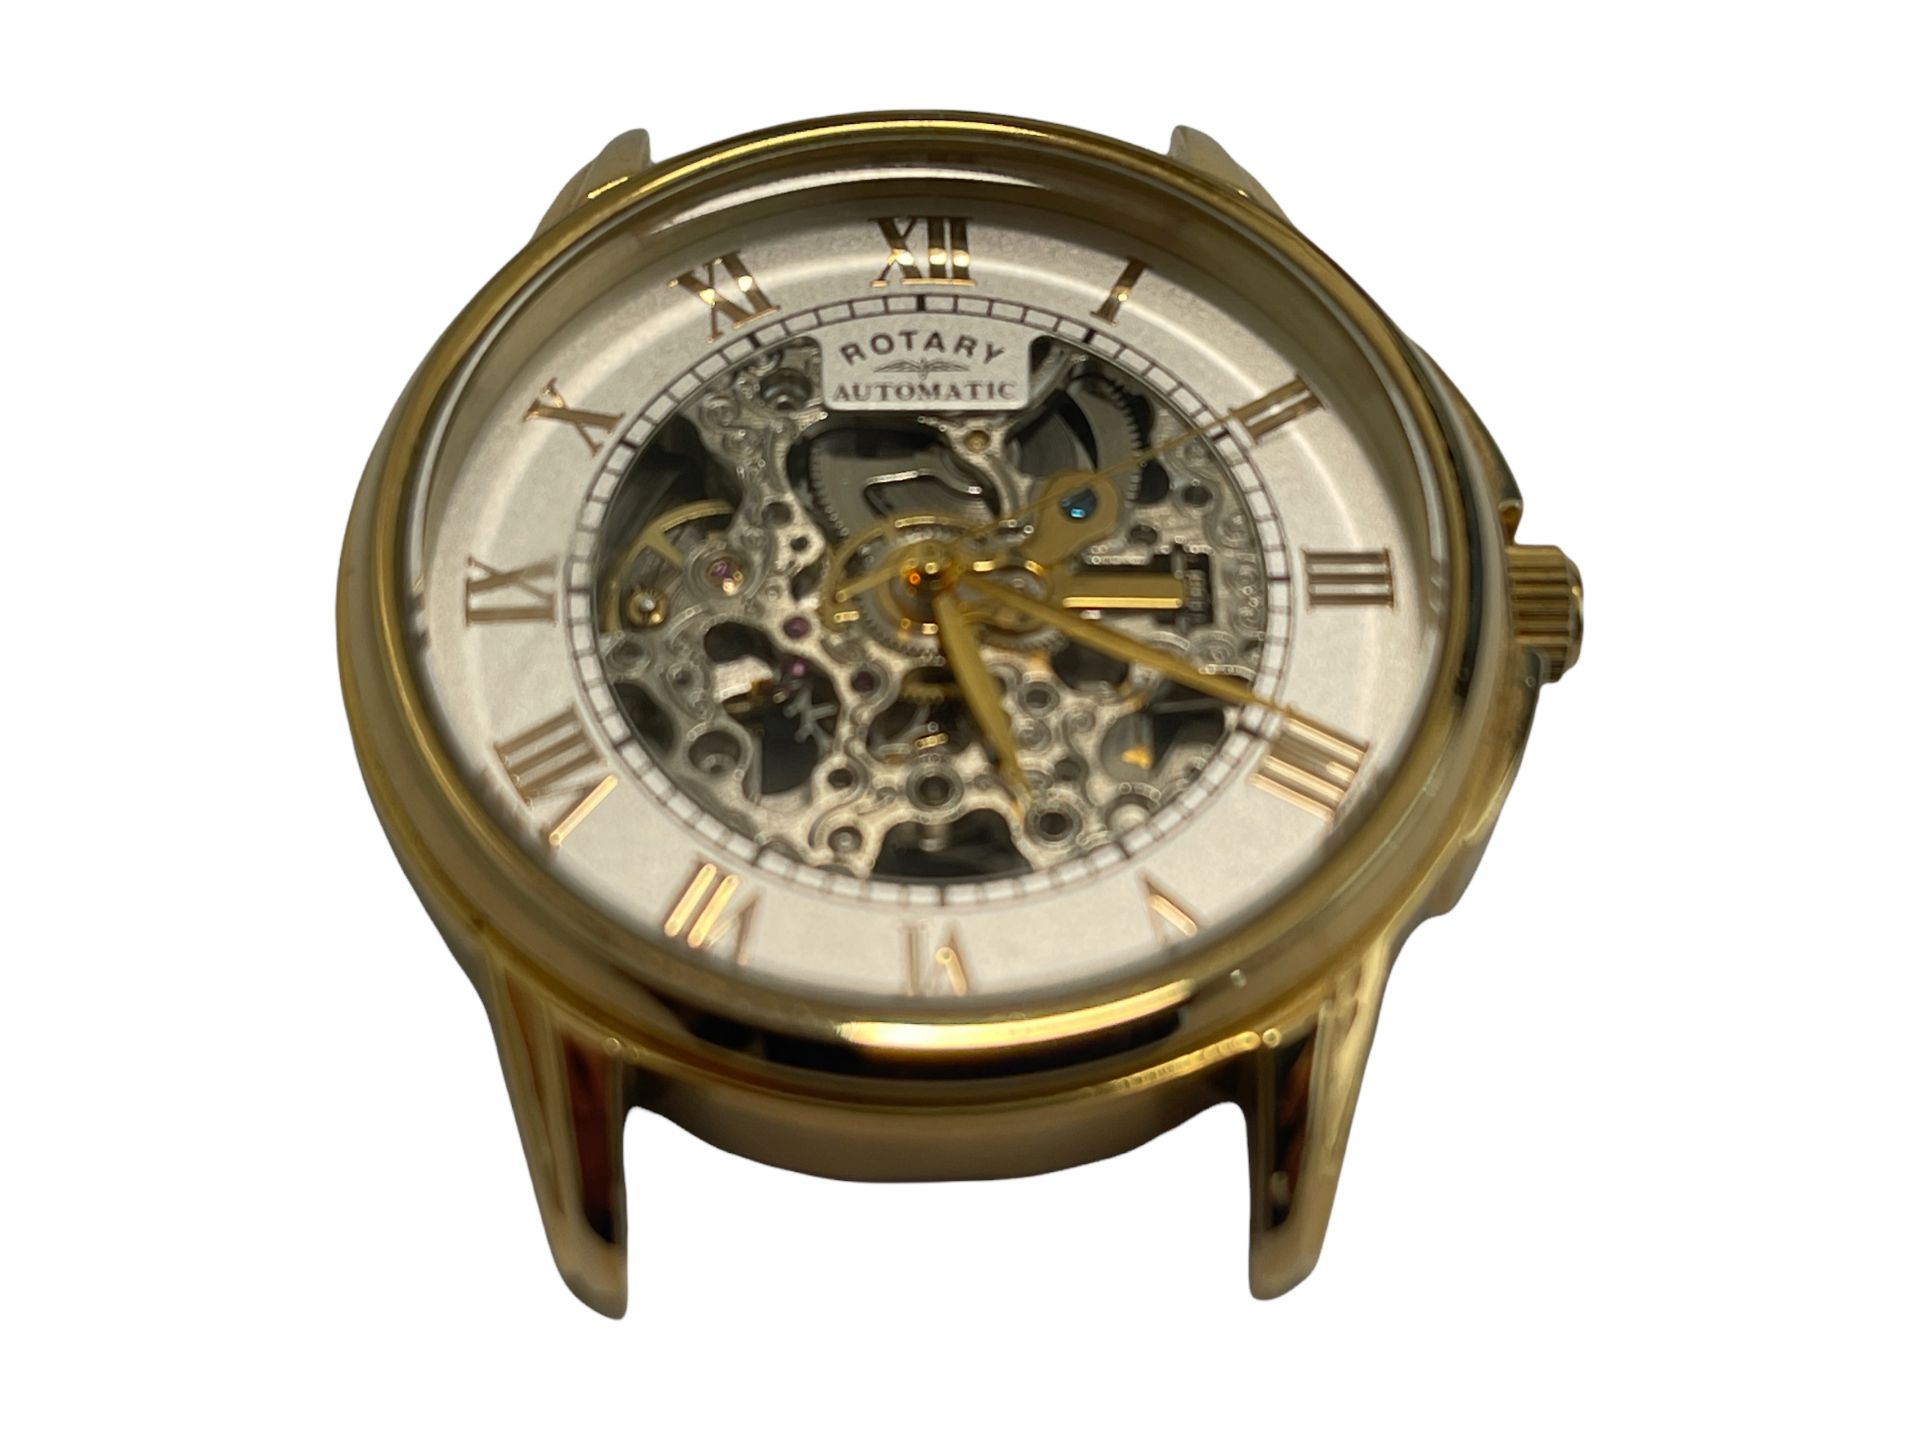 Lost property rotary watch Skellington automatic from our private jet charter - Image 4 of 6